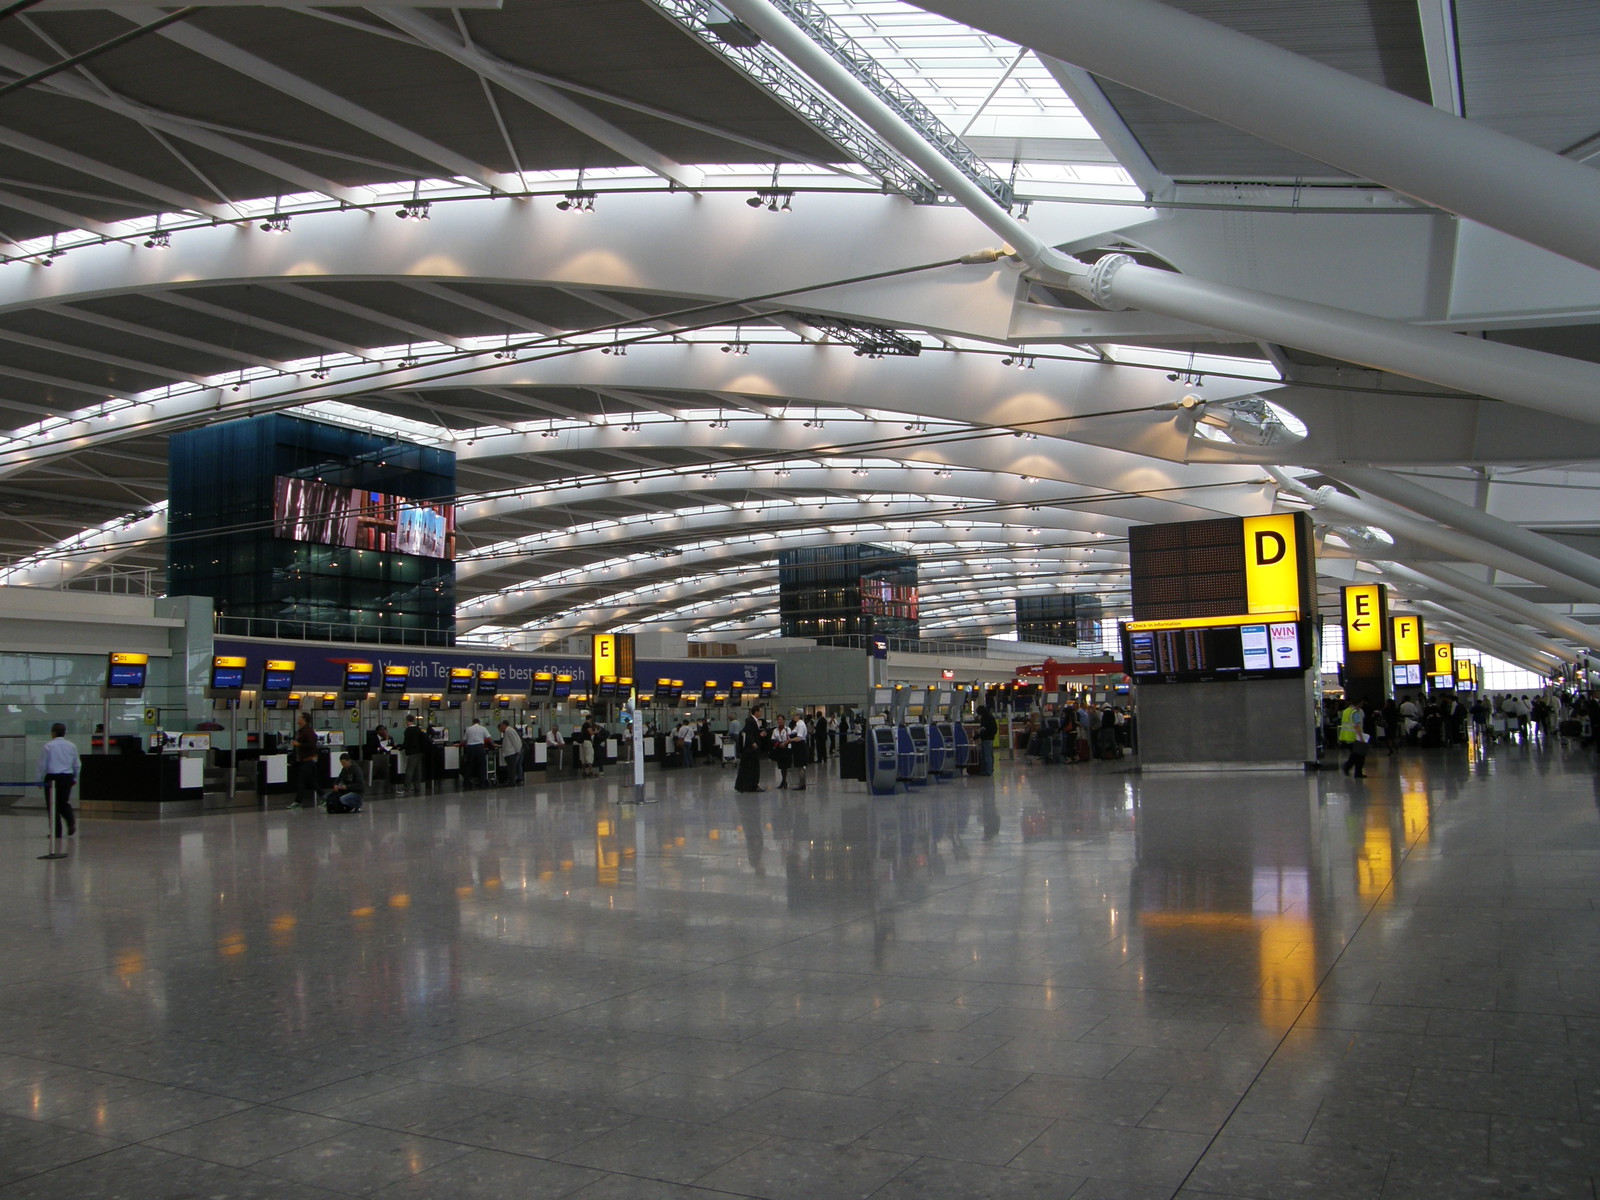 The Departures level in Terminal 5